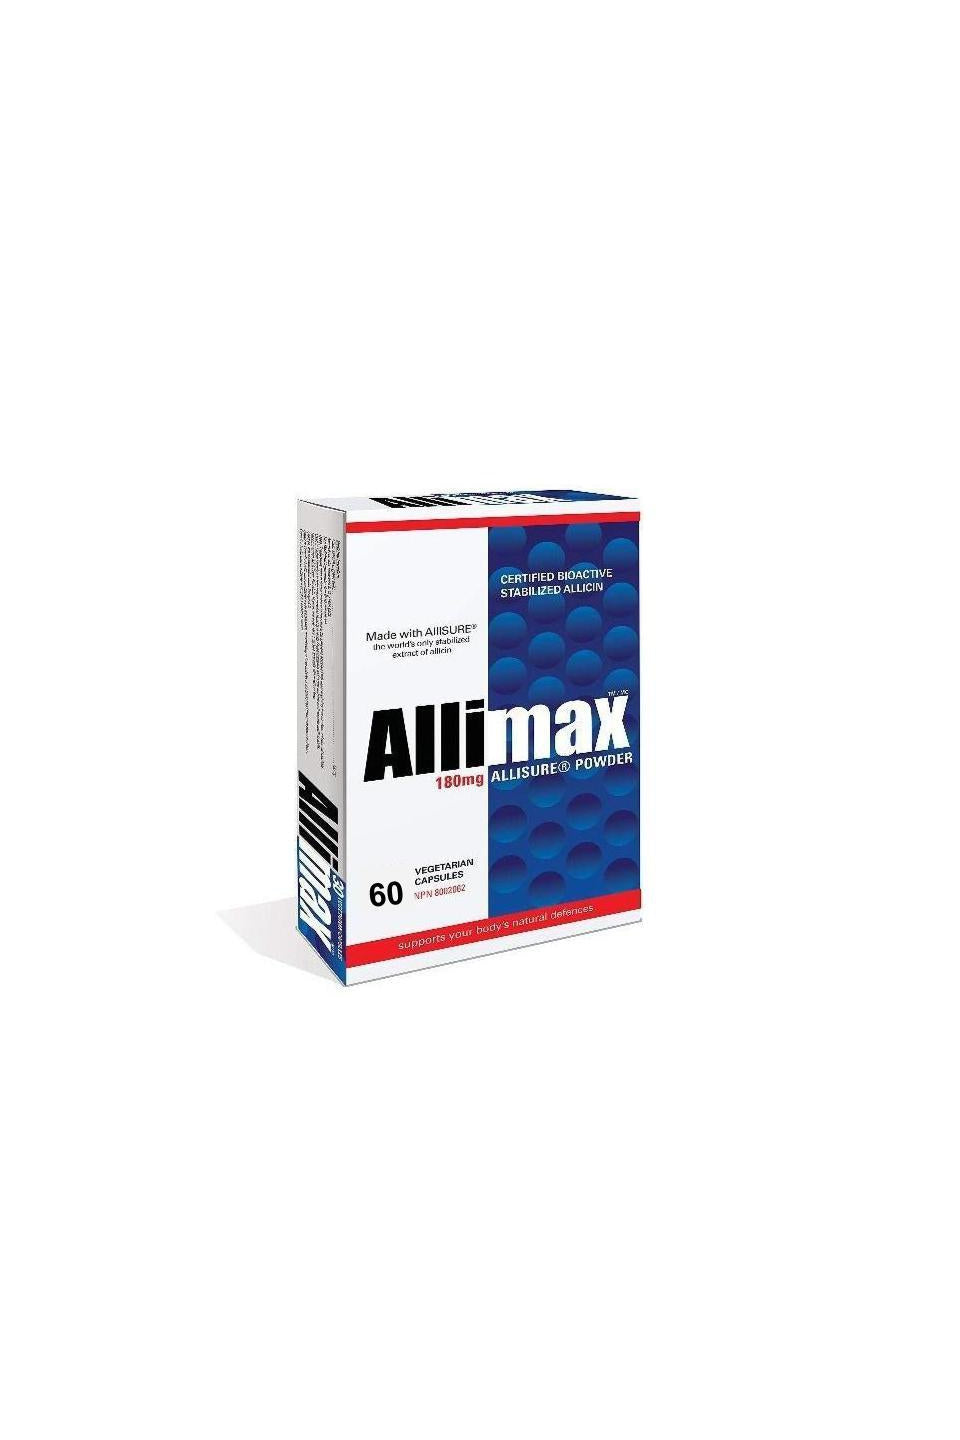 Allimax 60s